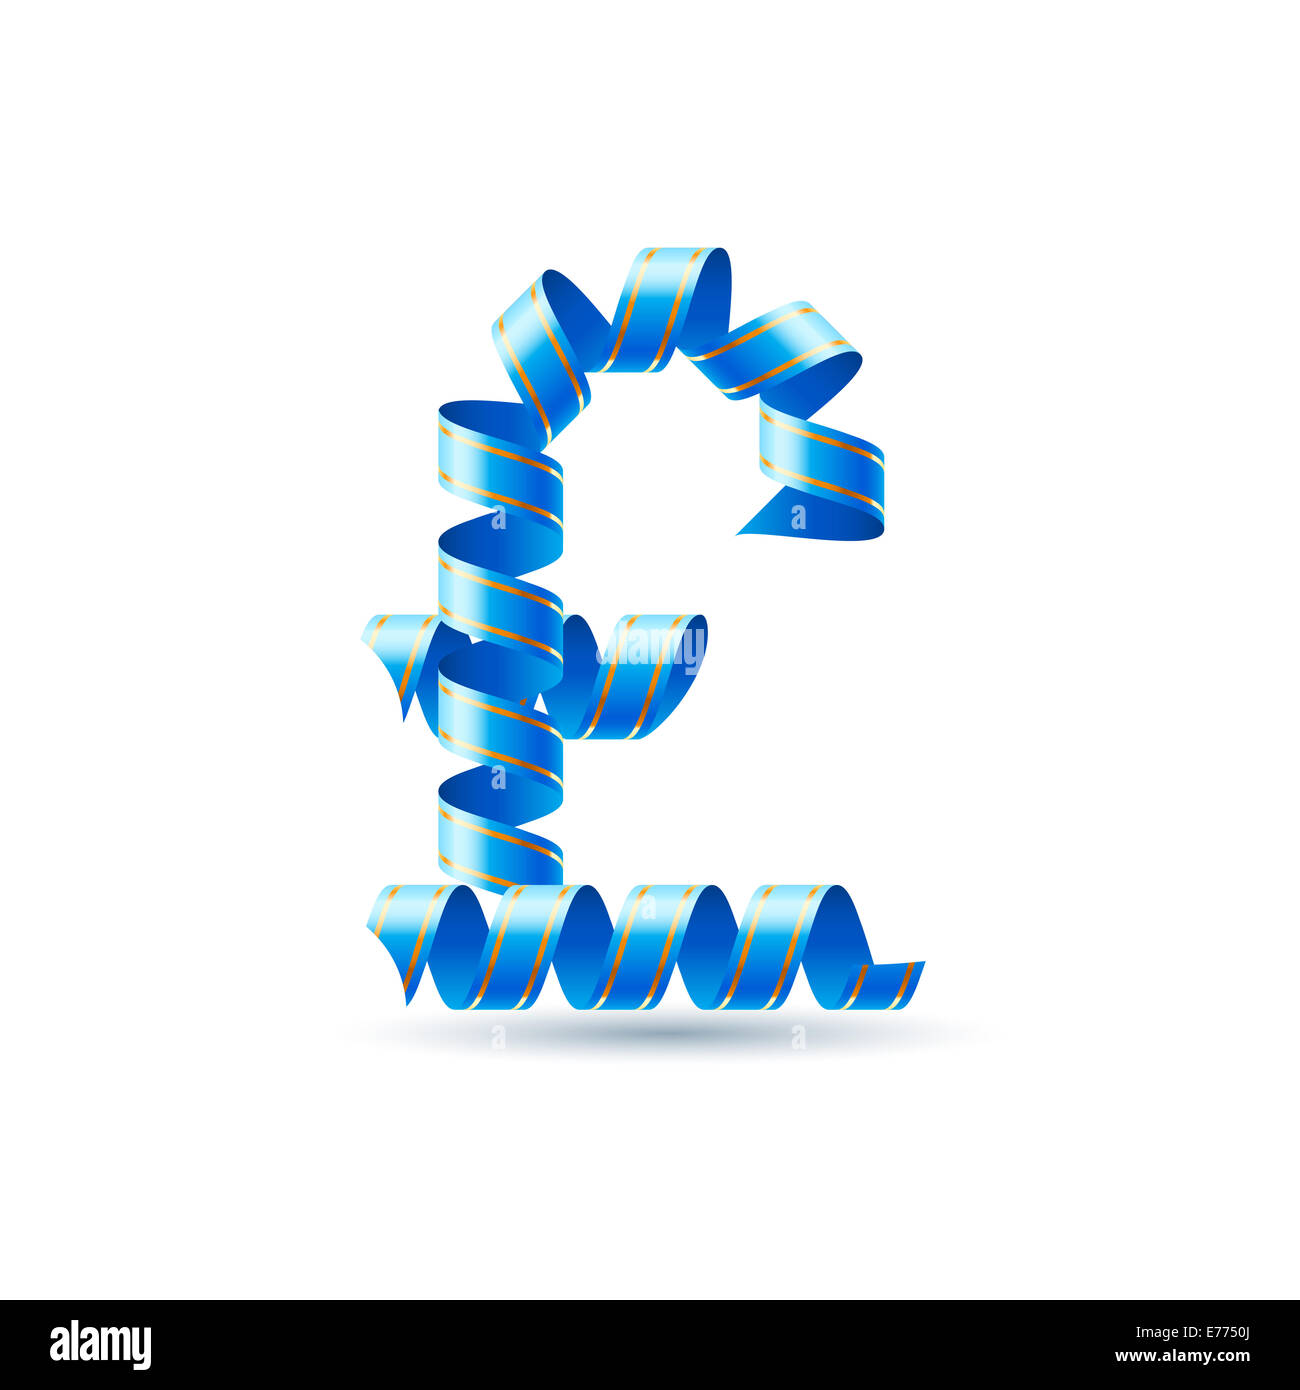 British pound sign made of spiral sky blue ribbon. Stock Photo